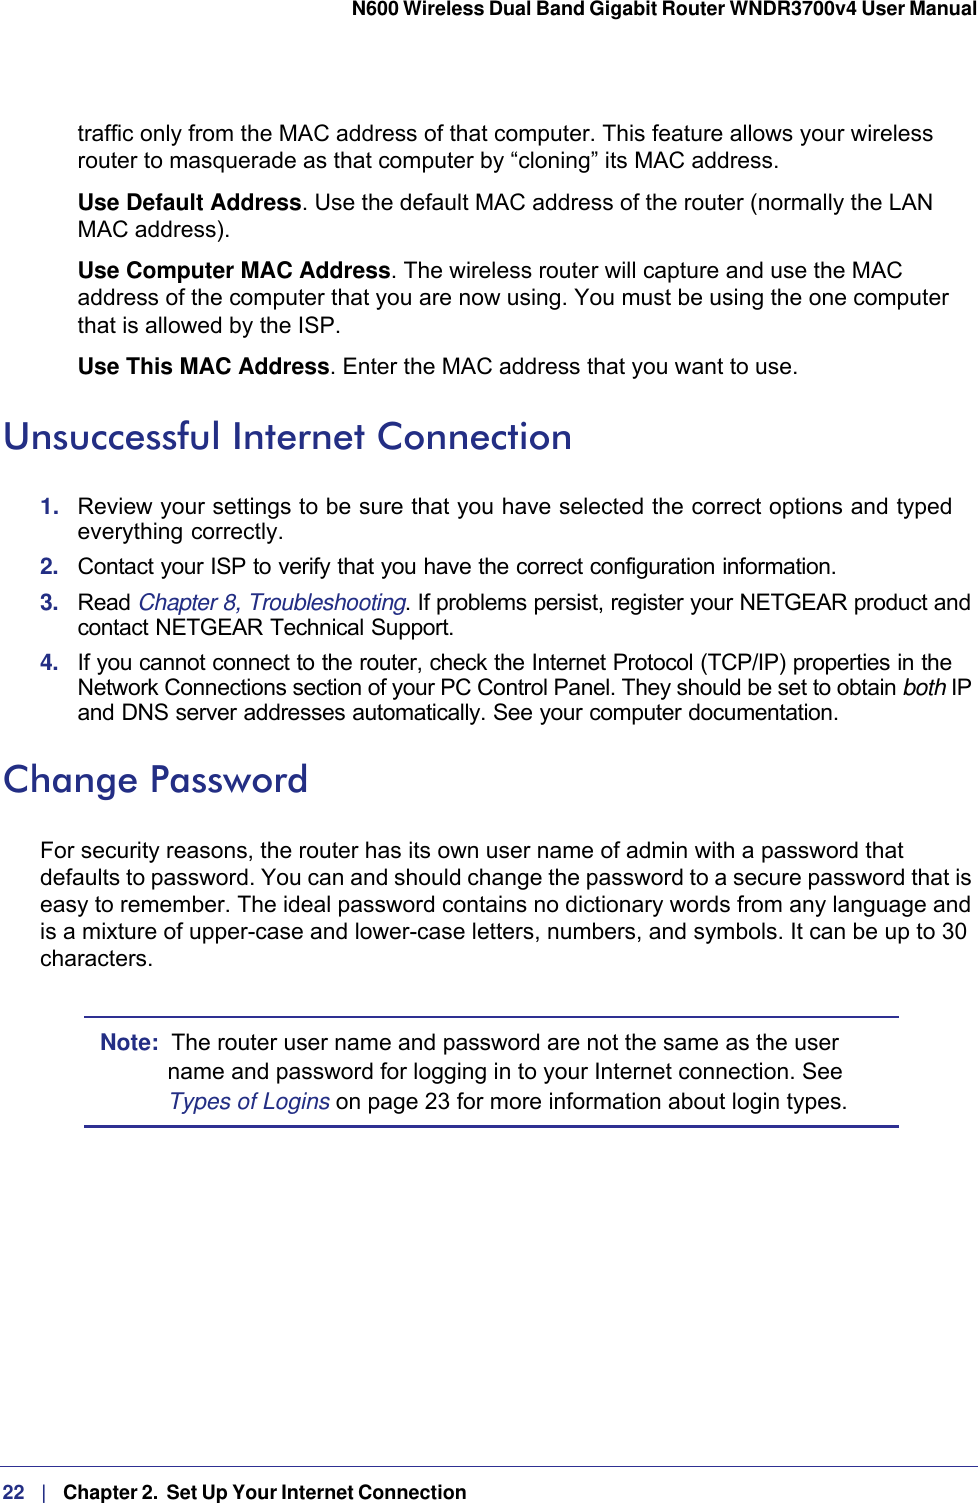 22   |   Chapter 2.  Set Up Your Internet Connection  N600 Wireless Dual Band Gigabit Router WNDR3700v4 User Manual traffic only from the MAC address of that computer. This feature allows your wireless router to masquerade as that computer by “cloning” its MAC address. Use Default Address. Use the default MAC address of the router (normally the LAN MAC address).Use Computer MAC Address. The wireless router will capture and use the MAC address of the computer that you are now using. You must be using the one computer that is allowed by the ISP.Use This MAC Address. Enter the MAC address that you want to use.Unsuccessful Internet Connection1.  Review your settings to be sure that you have selected the correct options and typed everything correctly. 2.  Contact your ISP to verify that you have the correct configuration information.3.  Read Chapter 8, Troubleshooting. If problems persist, register your NETGEAR product and contact NETGEAR Technical Support.4.  If you cannot connect to the router, check the Internet Protocol (TCP/IP) properties in the Network Connections section of your PC Control Panel. They should be set to obtain both IP and DNS server addresses automatically. See your computer documentation.Change PasswordFor security reasons, the router has its own user name of admin with a password that defaults to password. You can and should change the password to a secure password that is easy to remember. The ideal password contains no dictionary words from any language and is a mixture of upper-case and lower-case letters, numbers, and symbols. It can be up to 30 characters.Note:  The router user name and password are not the same as the user name and password for logging in to your Internet connection. See Types of Logins on page  23 for more information about login types.